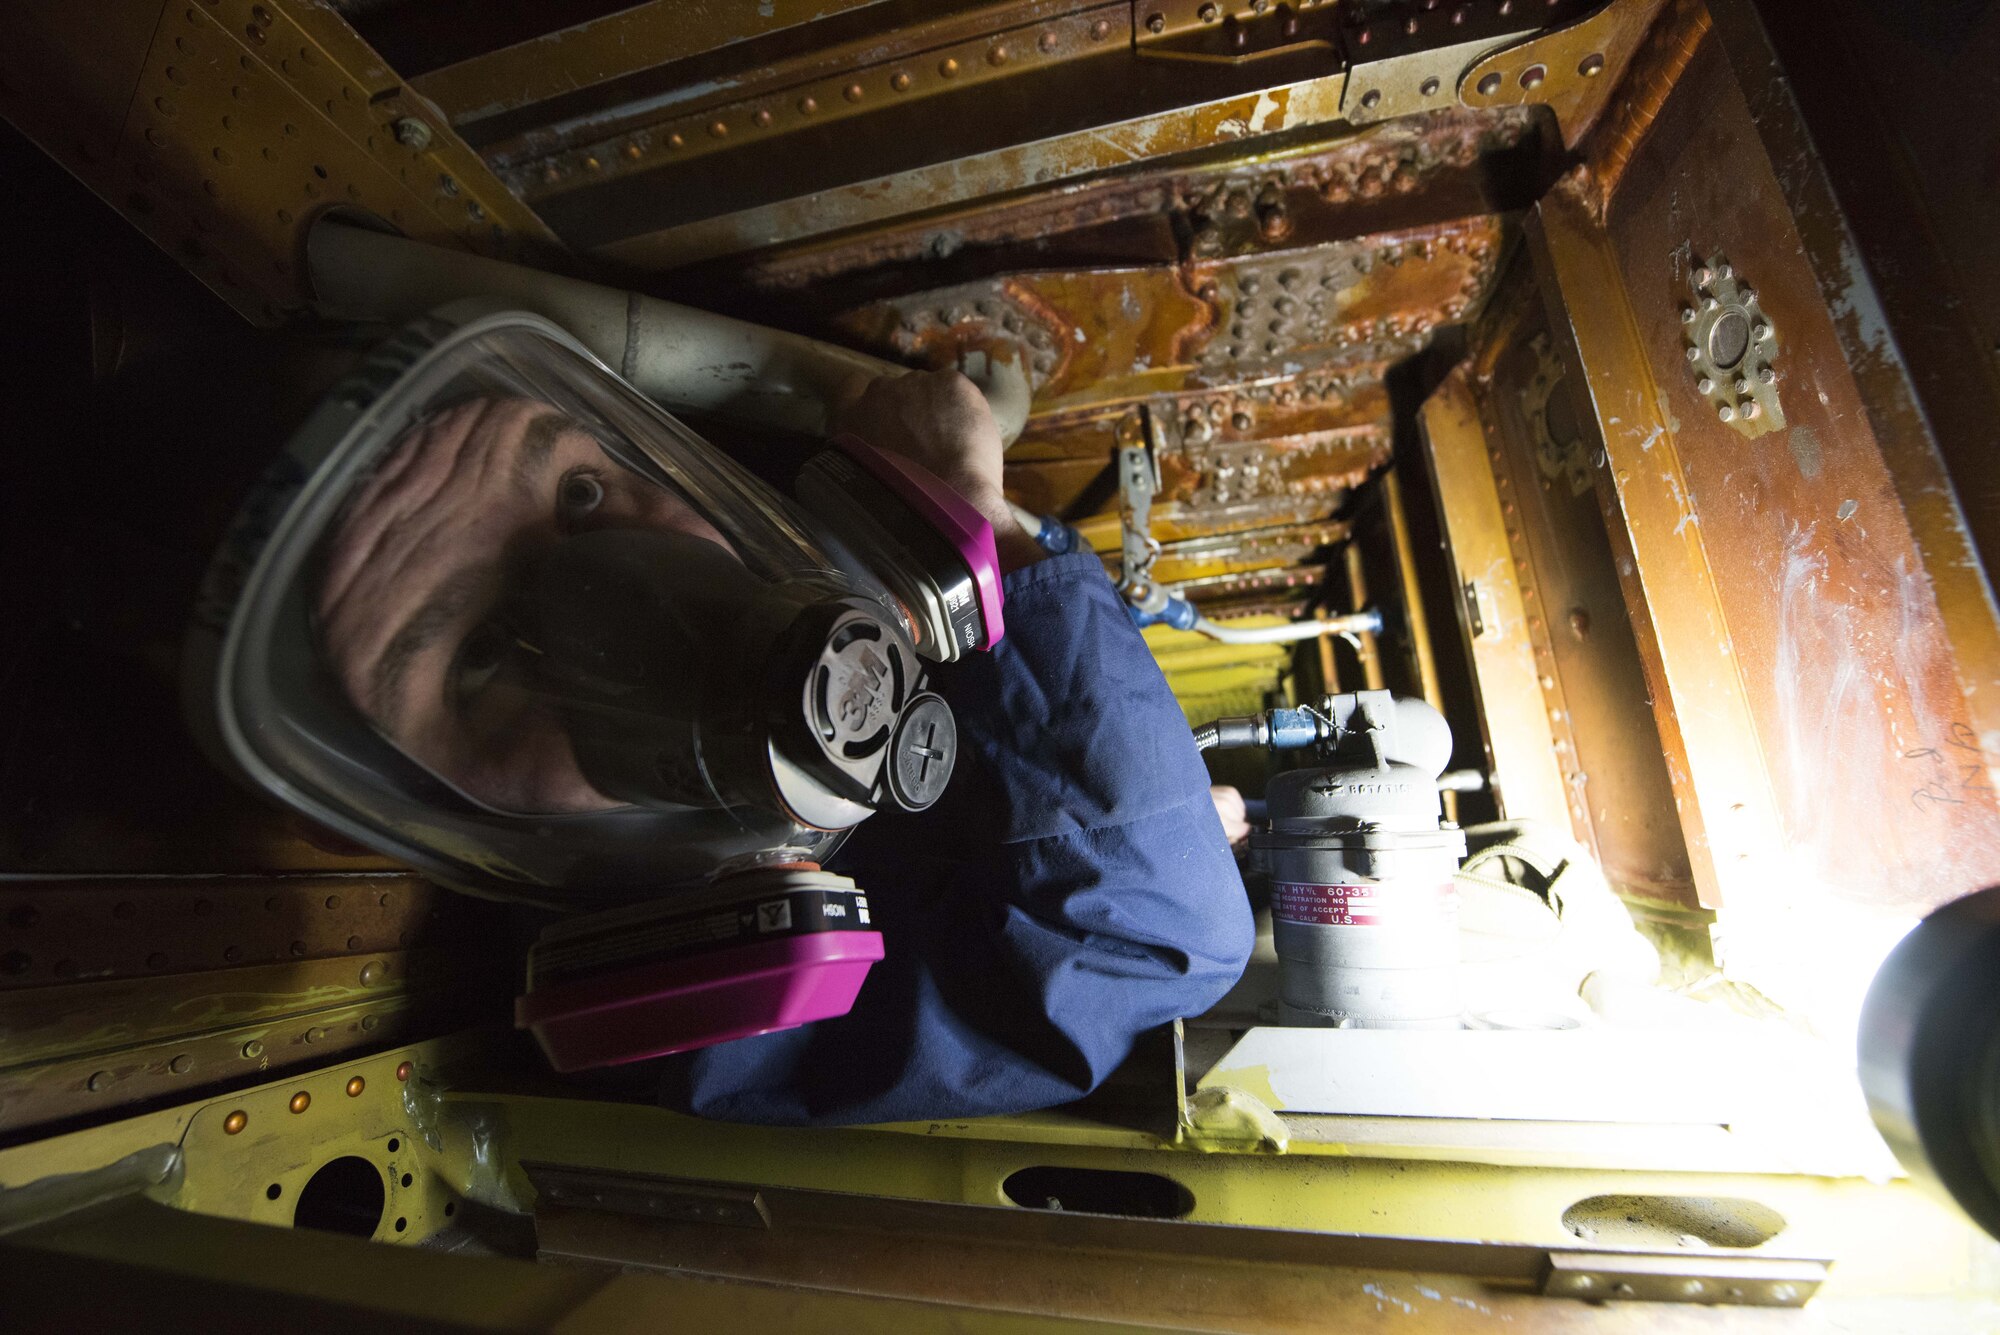 Airman 1st Class Elijah Simmons, 92nd Maintenance Squadron, Aircraft Fuel Systems Squadron apprentice, maneuvers into position inside the fuel tank training module, a section of a former KC-135 Stratotanker wing, during a training session at Fairchild Air Force Base, Washington, Nov. 21, 2017. The confines inside of a KC-135's wing can range from three by two and a half feet, to only 18 inches high and wide. (U.S. Air Force photo/Senior Airman Ryan Lackey)